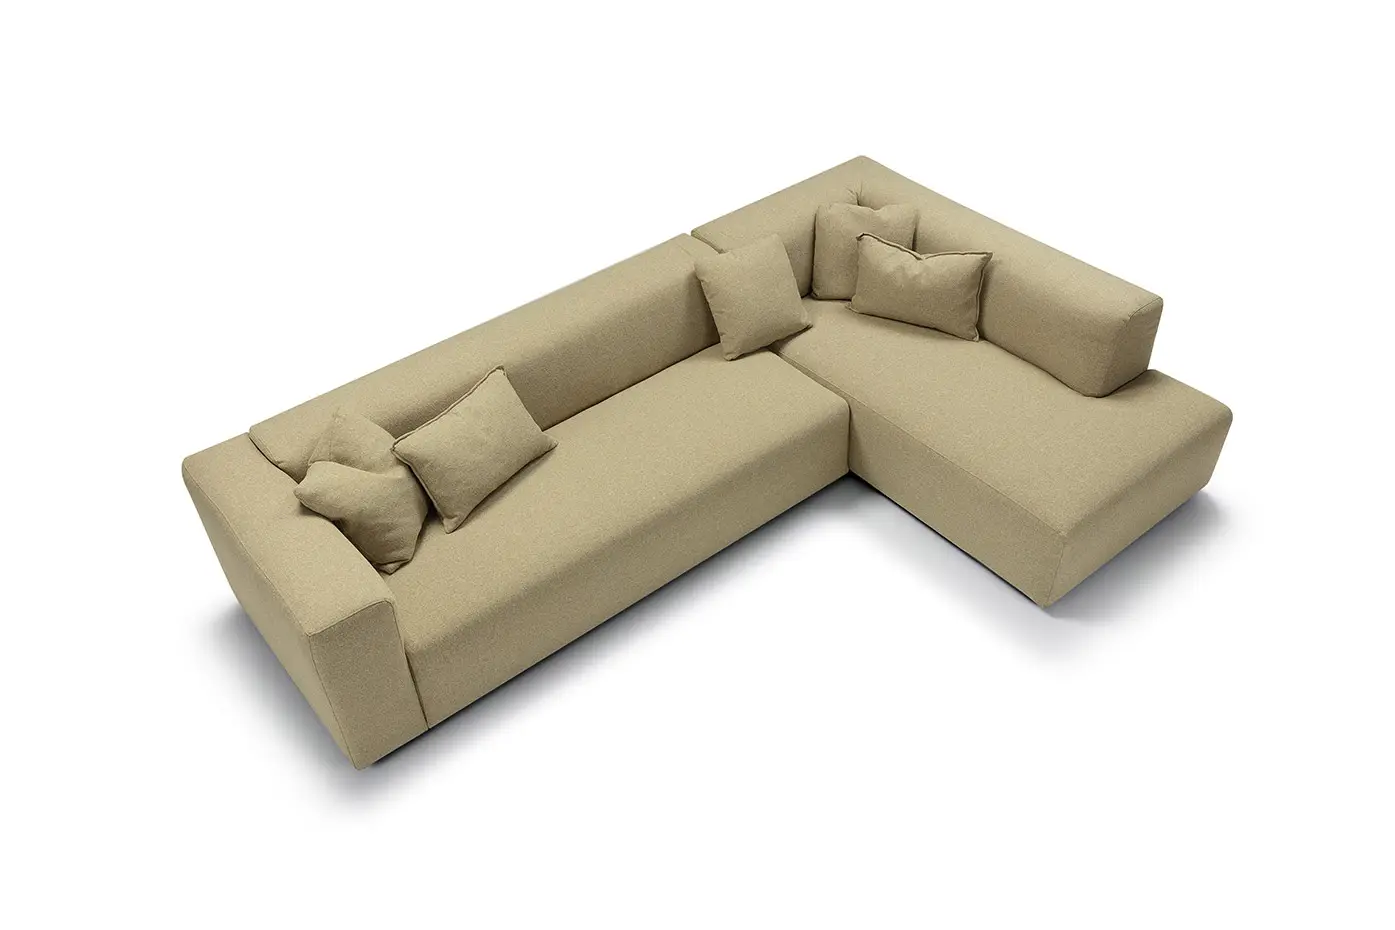 Milano furniture collection: accessories | SITS details, dimensions